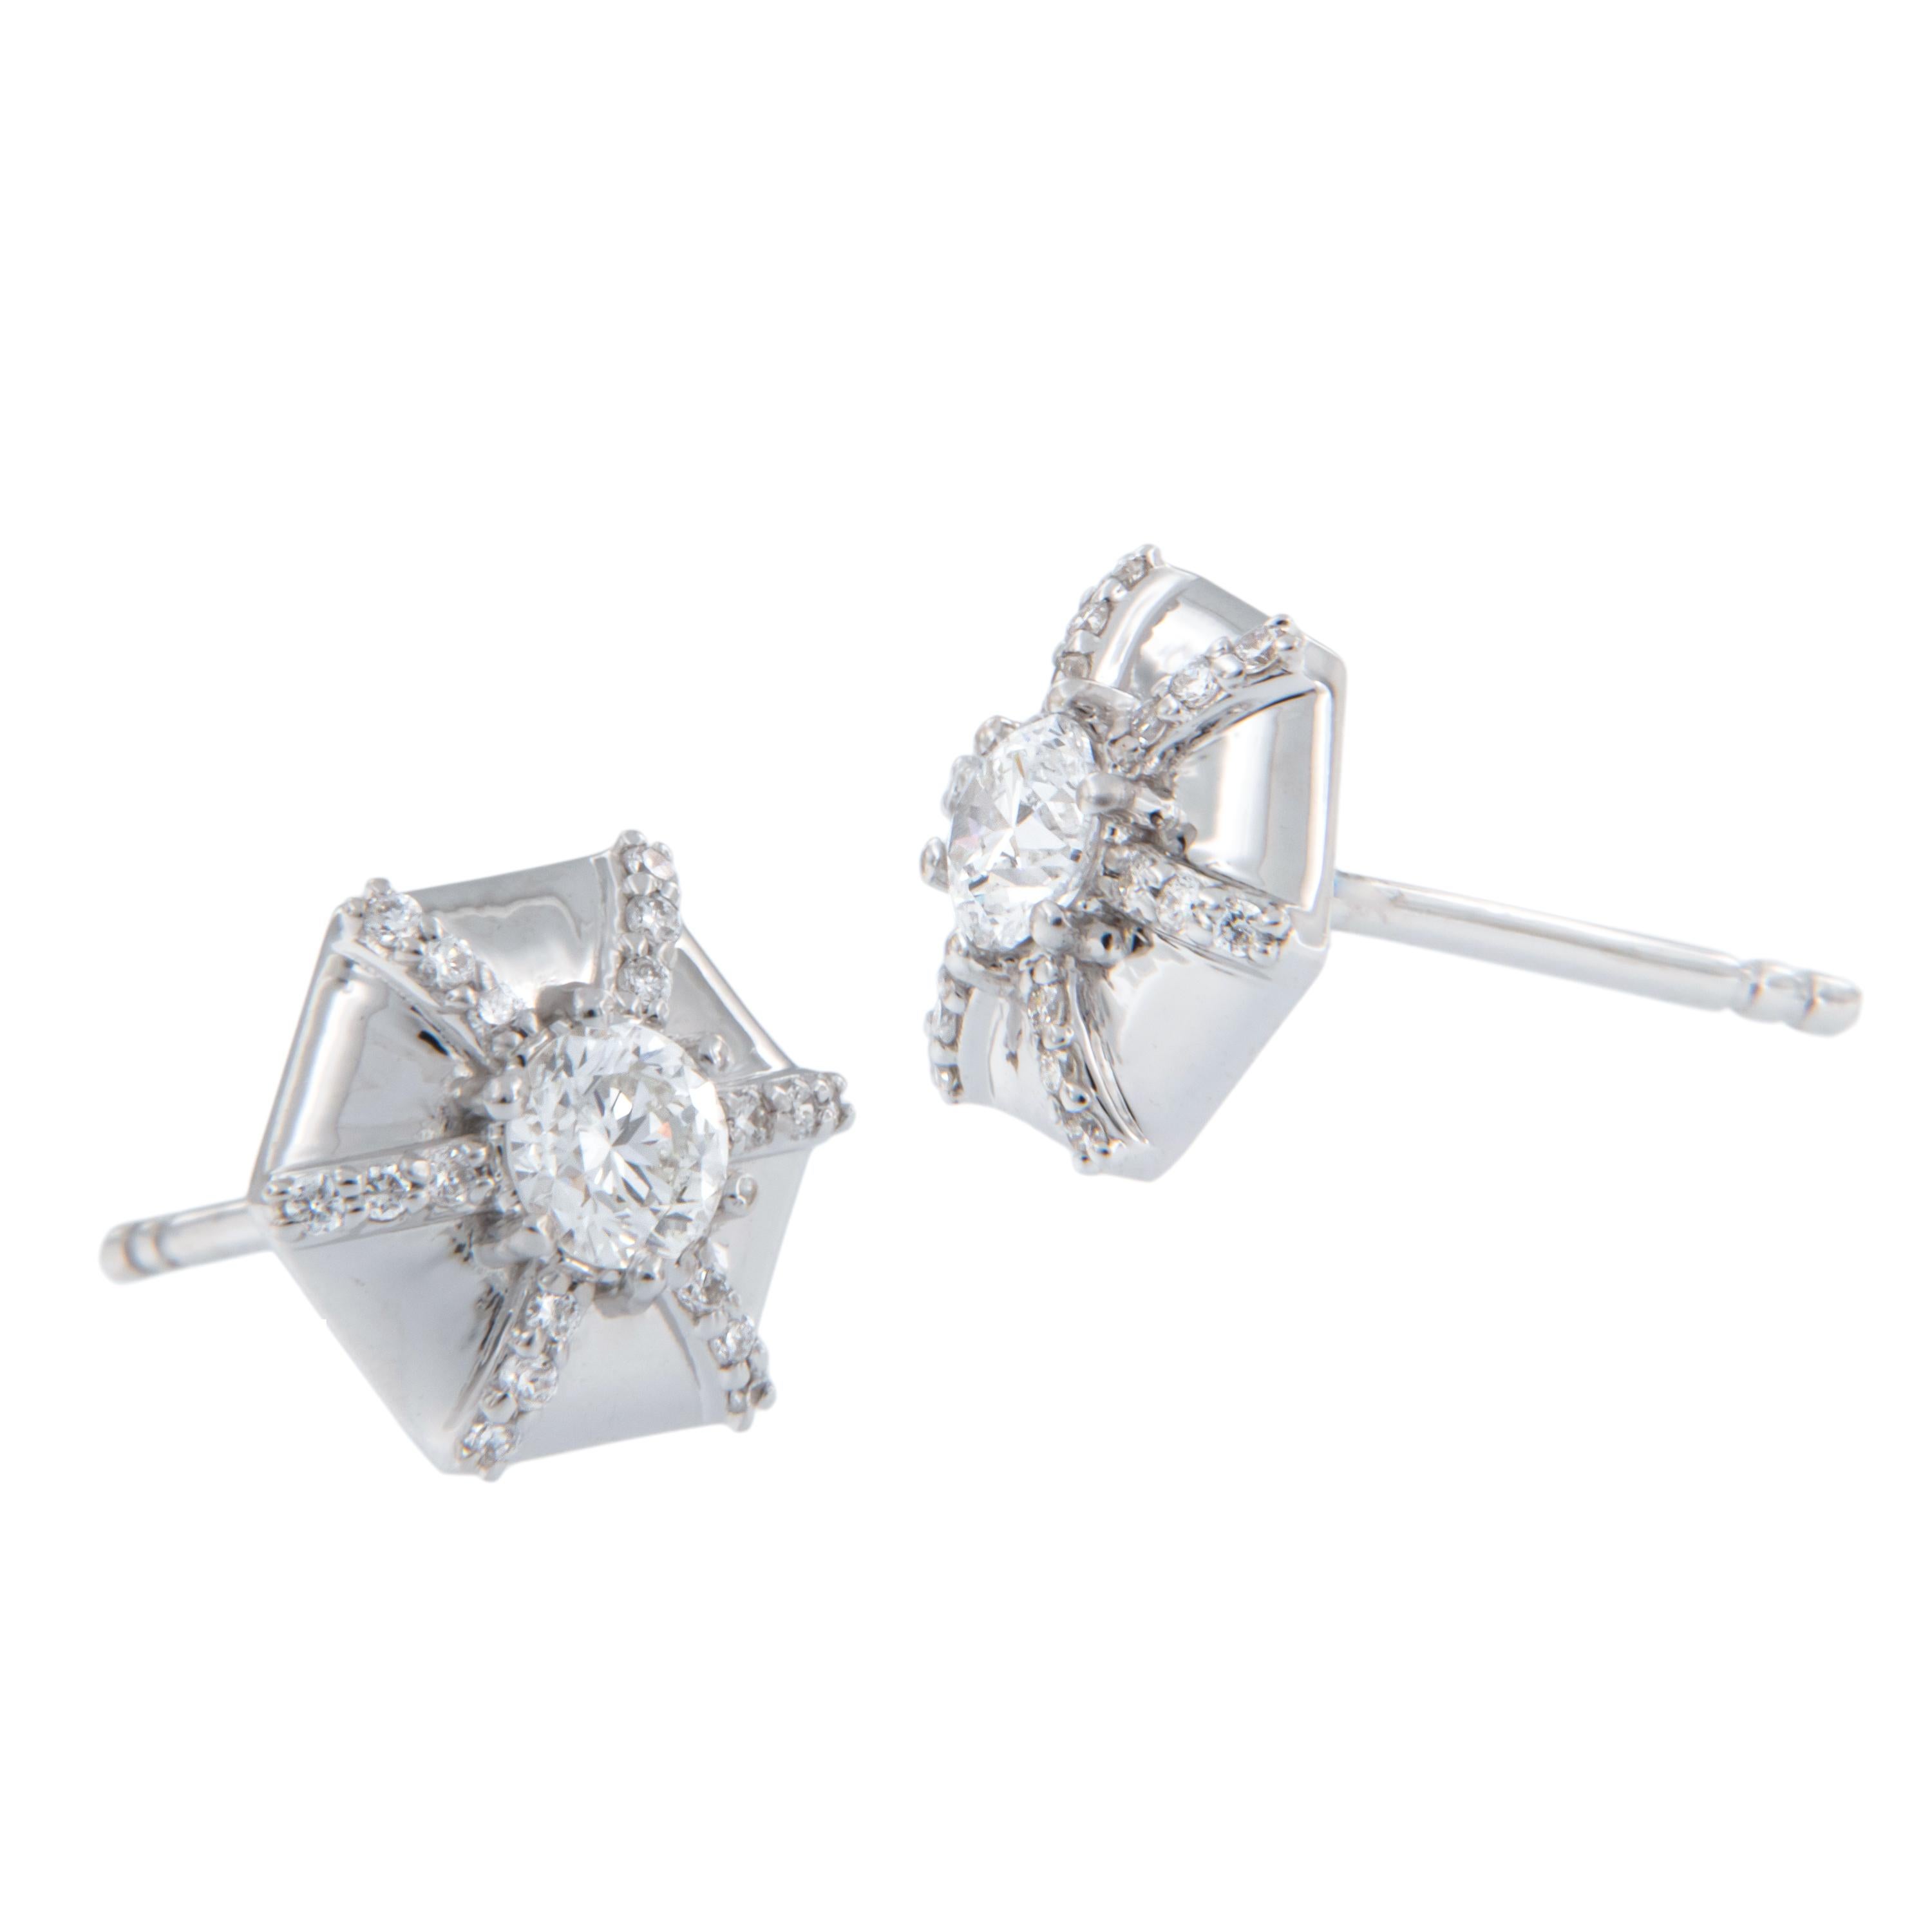 The Queen Collection was inspired by royalty, but with a modern twist. The diamonds represent the richness and passion of a true Queen. Made in royal 18k white gold these fetching hexagon stud earrings with 0.41 Cttw diamonds will be sure to make